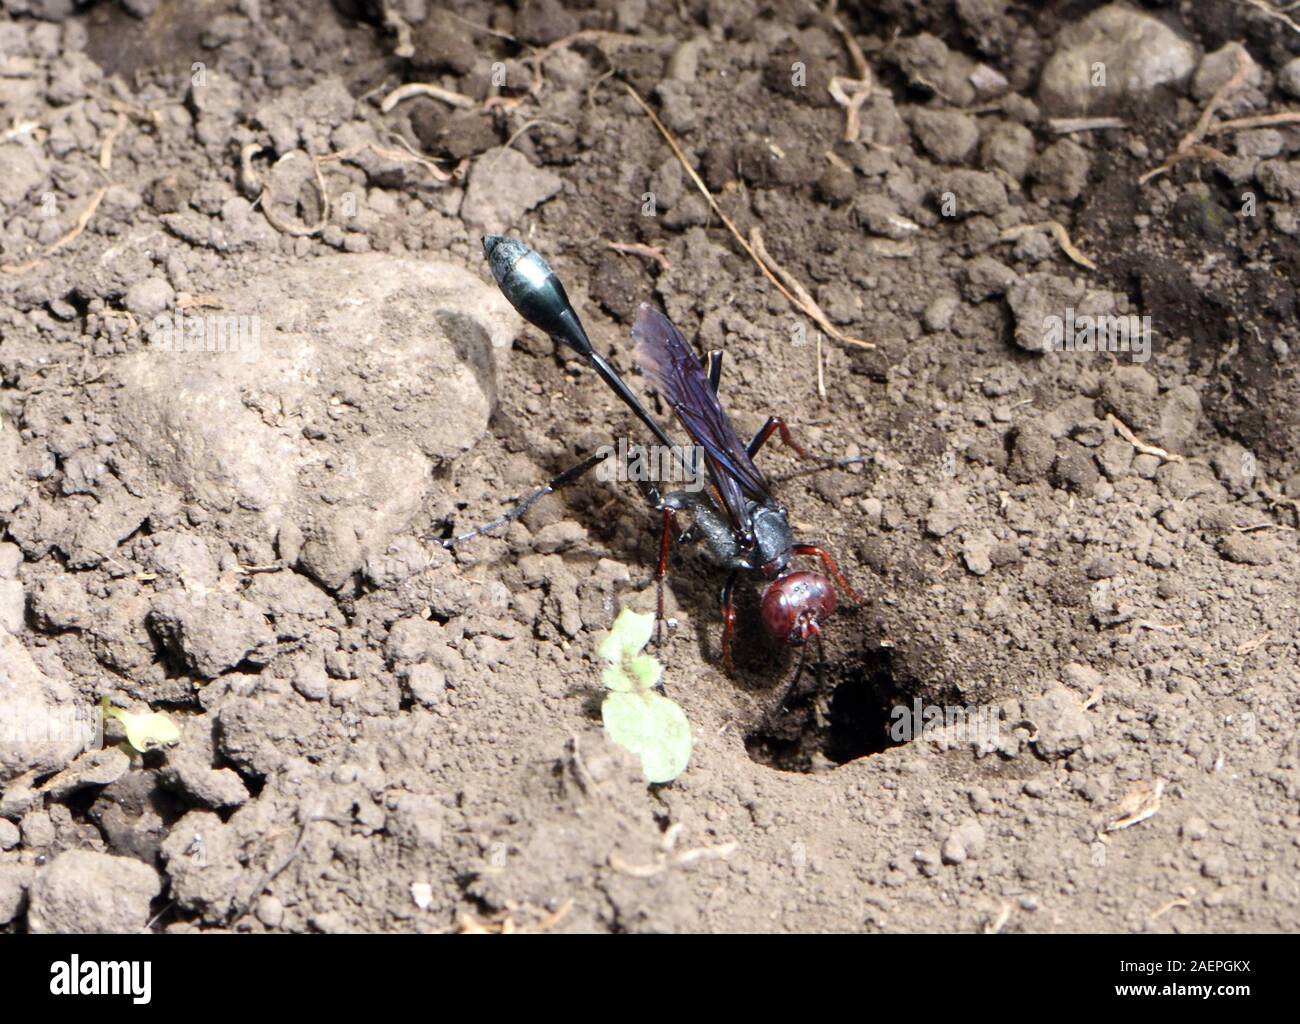 A purple wasp enters a burrow in dry soil. Arusha National Park. Arusha, Tanzania. Stock Photo